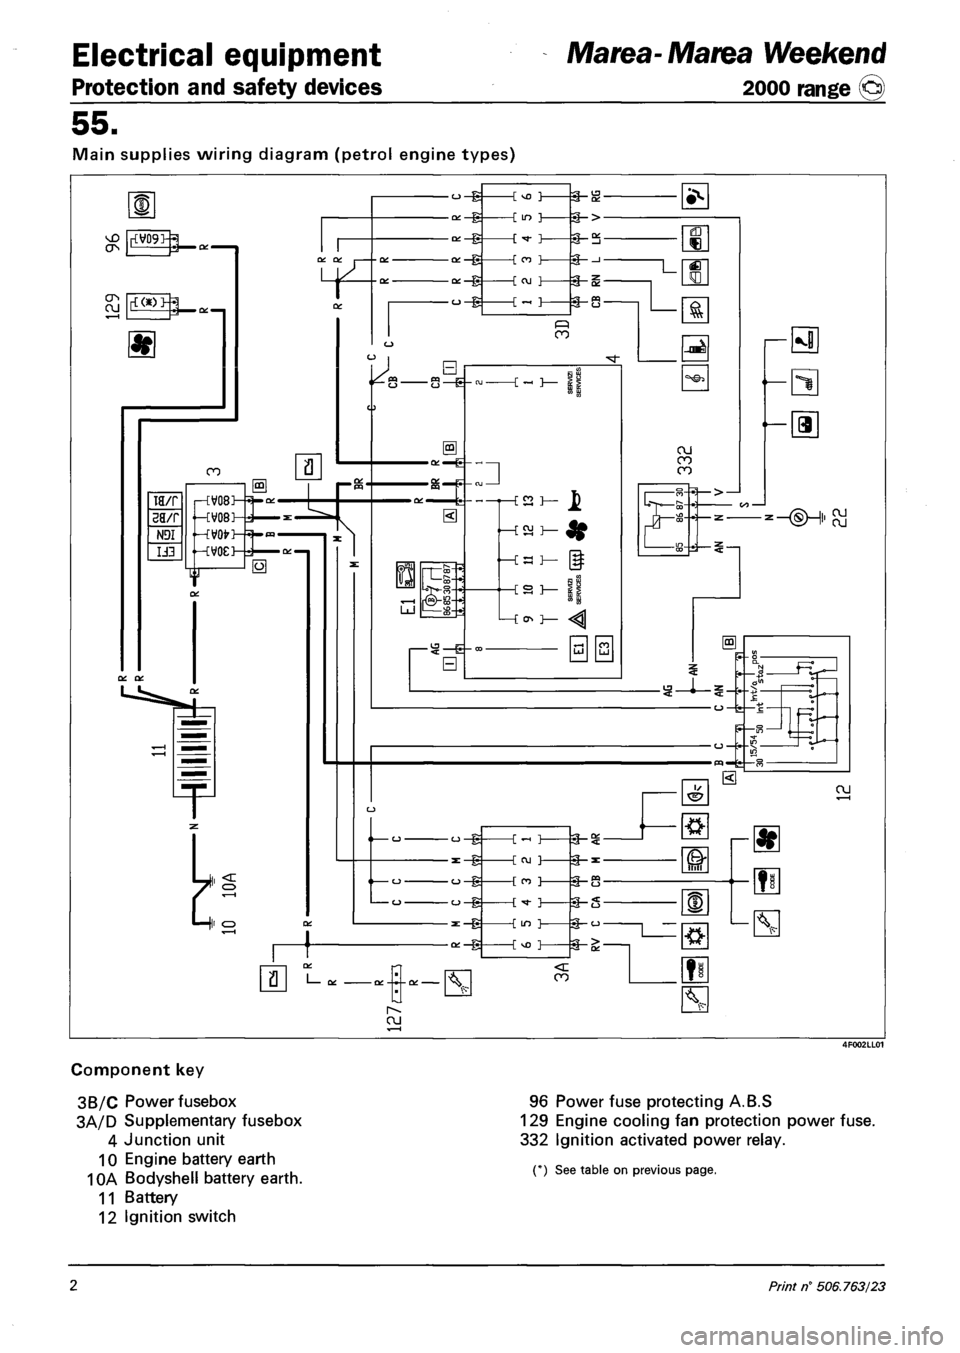 FIAT MAREA 2000 1.G Owners Guide Electrical equipment 
Protection and safety devices 
Marea- Marea Weekend 
2000 range ©) 
55. 
Main supplies wiring diagram (petrol engine types) 
Component key 
3B/C Power fusebox 
3A/D Supplementar